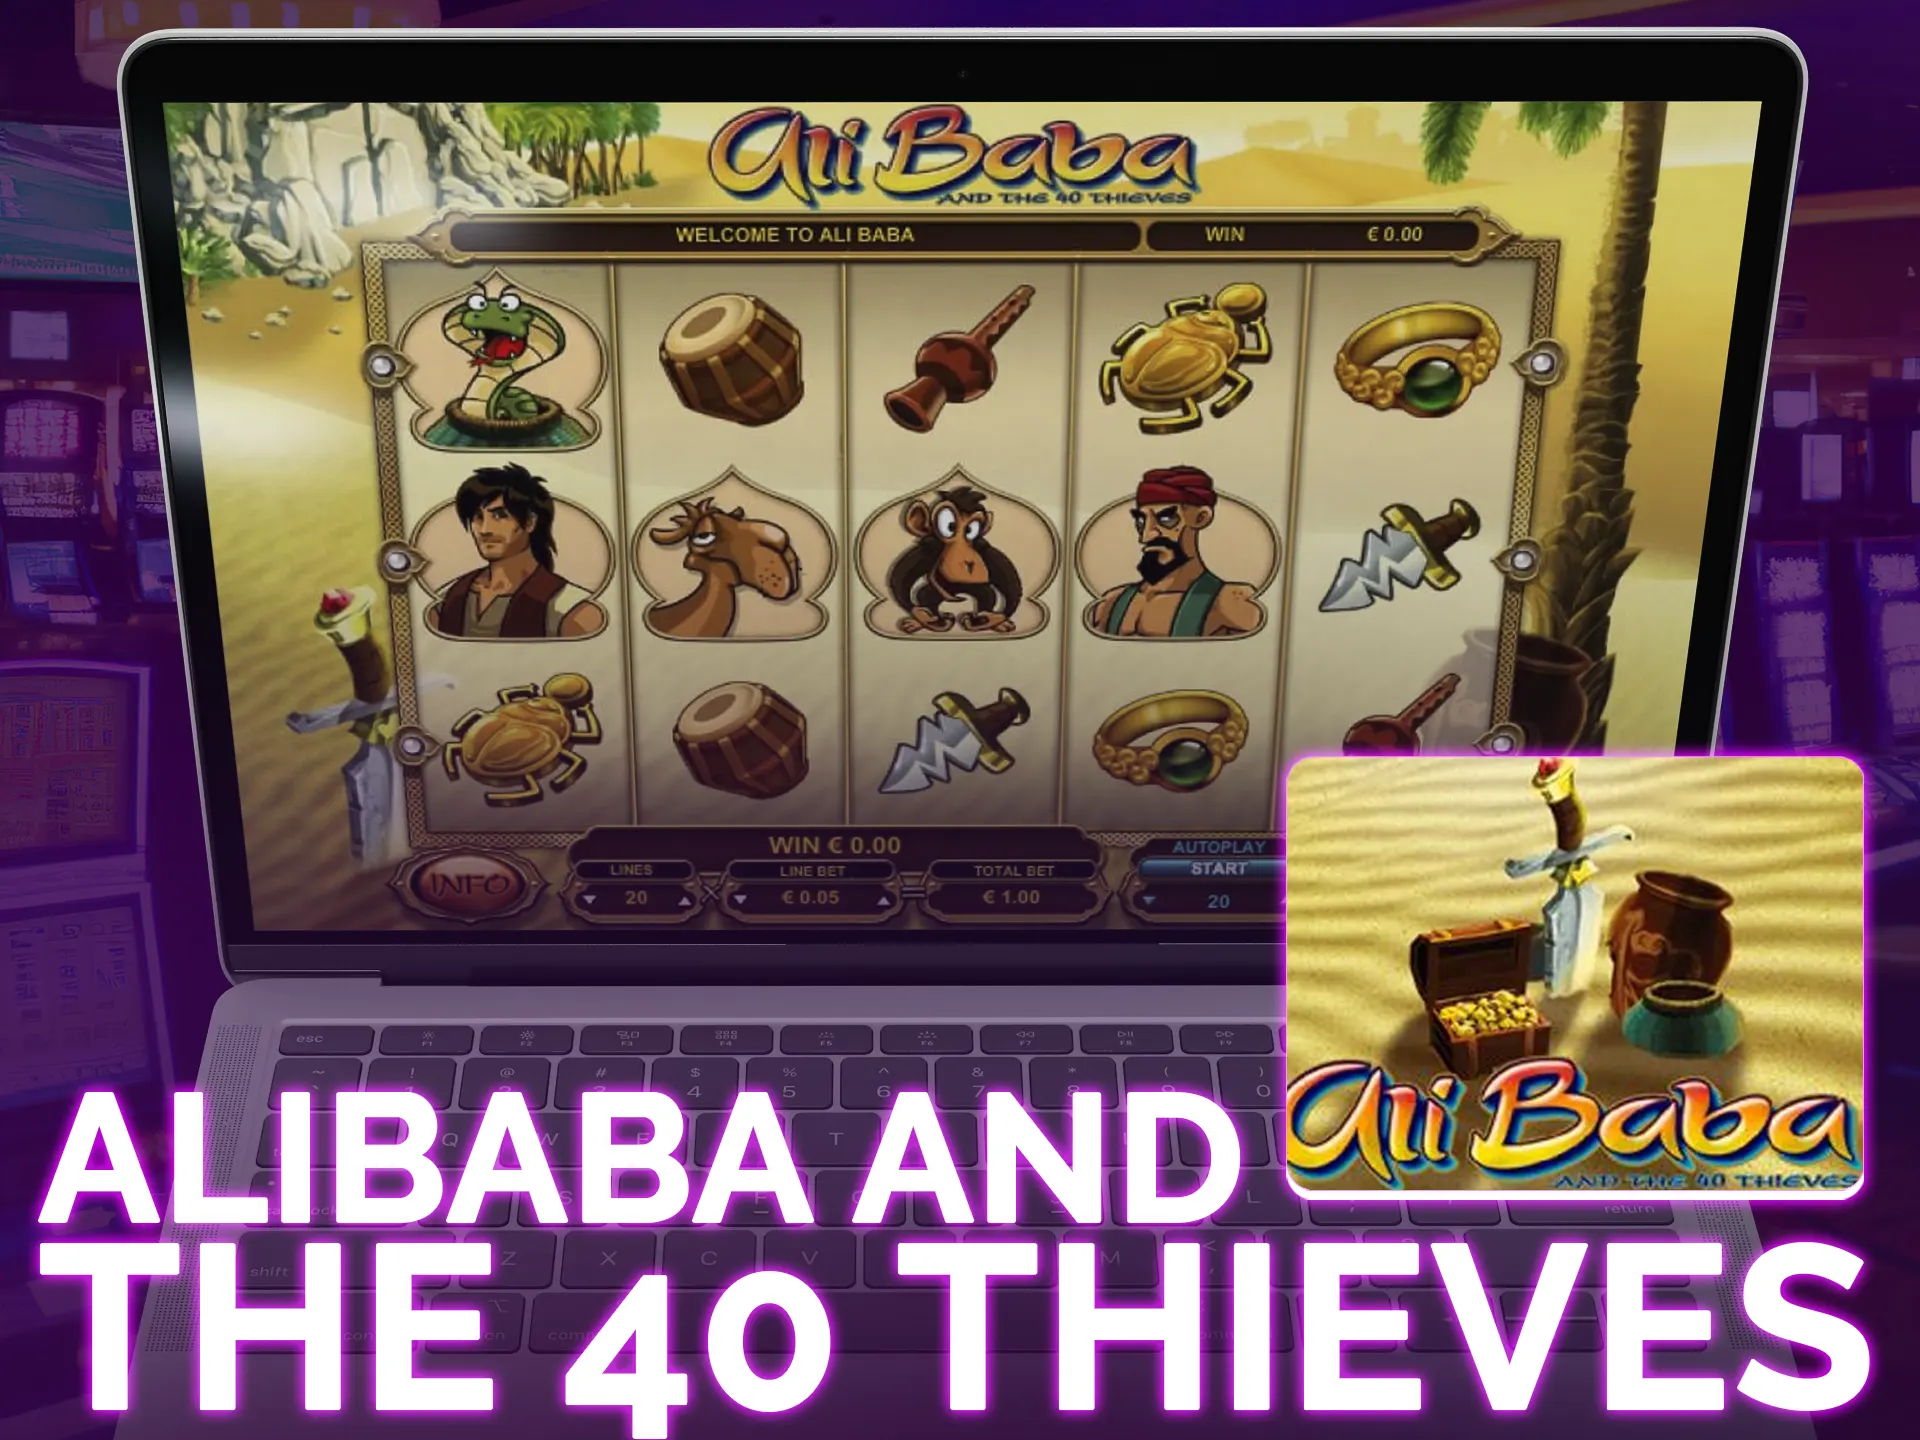 Alibaba and the 40 thieves slot: 20 paylines, 94% RTP, average volatility, freespin round, special symbols.